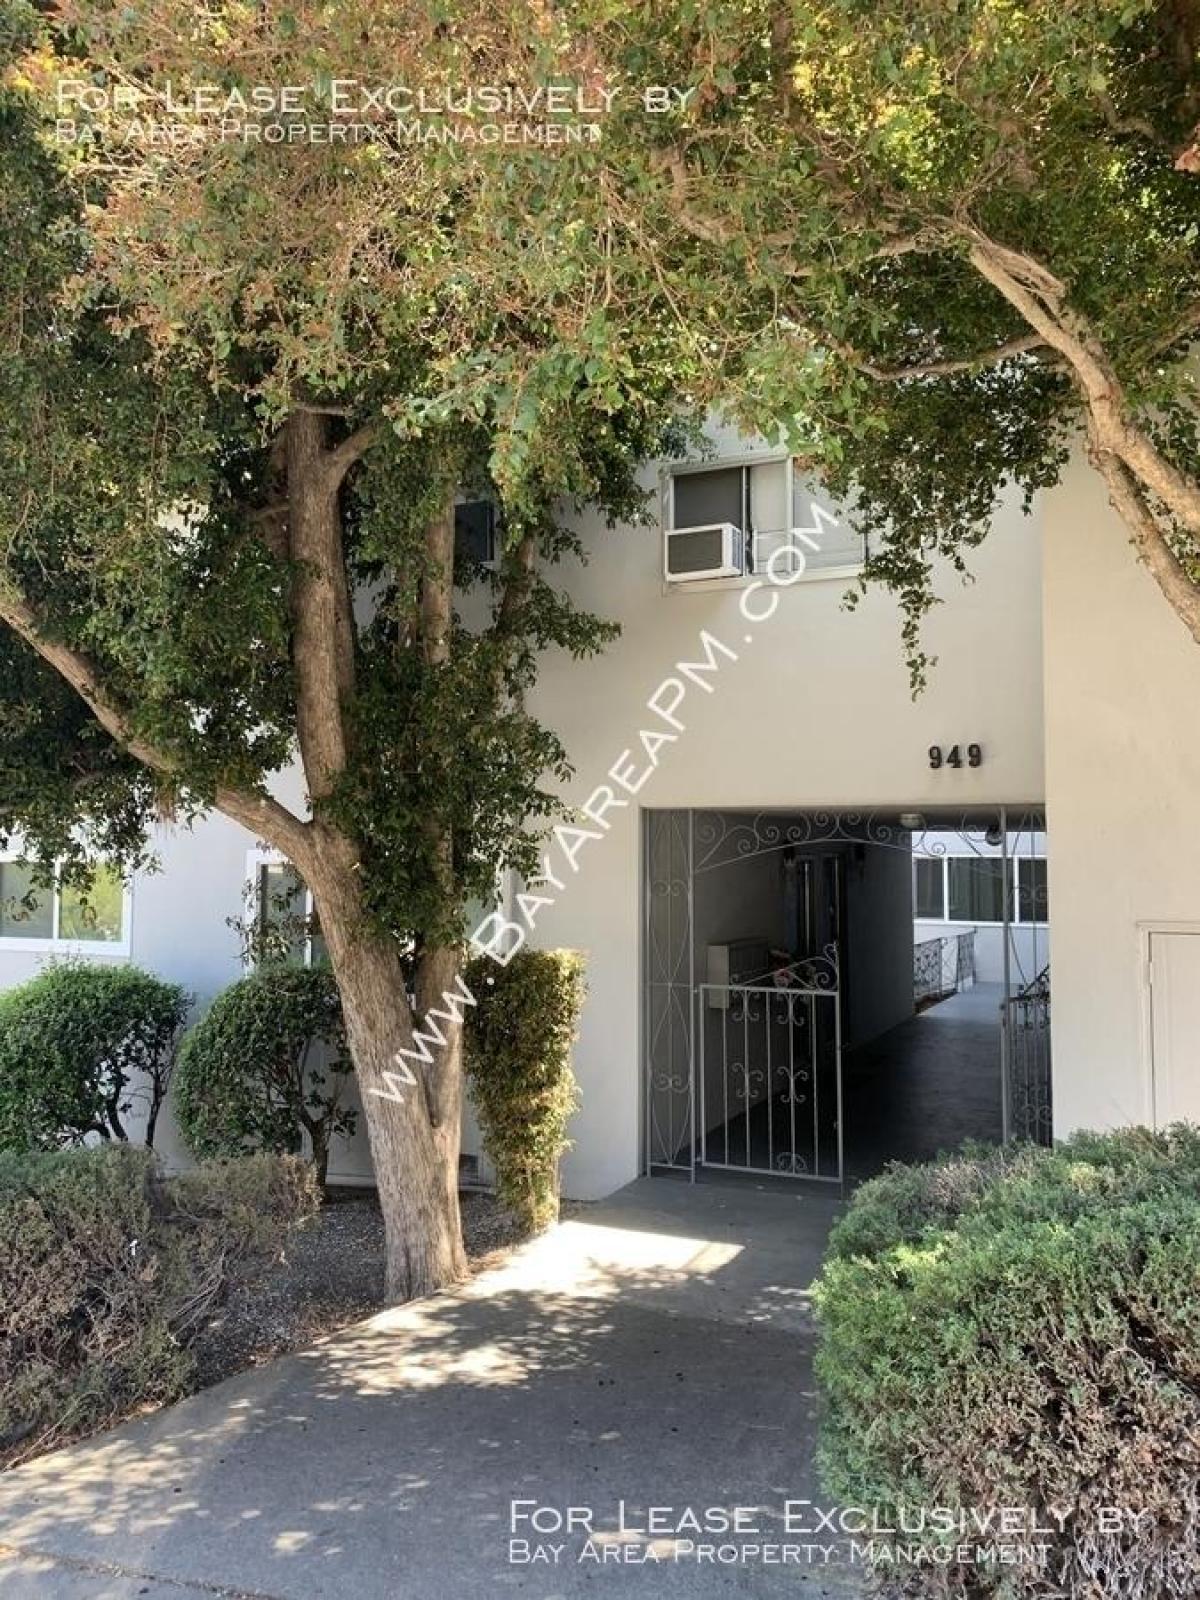 Picture of Apartment For Rent in Belmont, California, United States